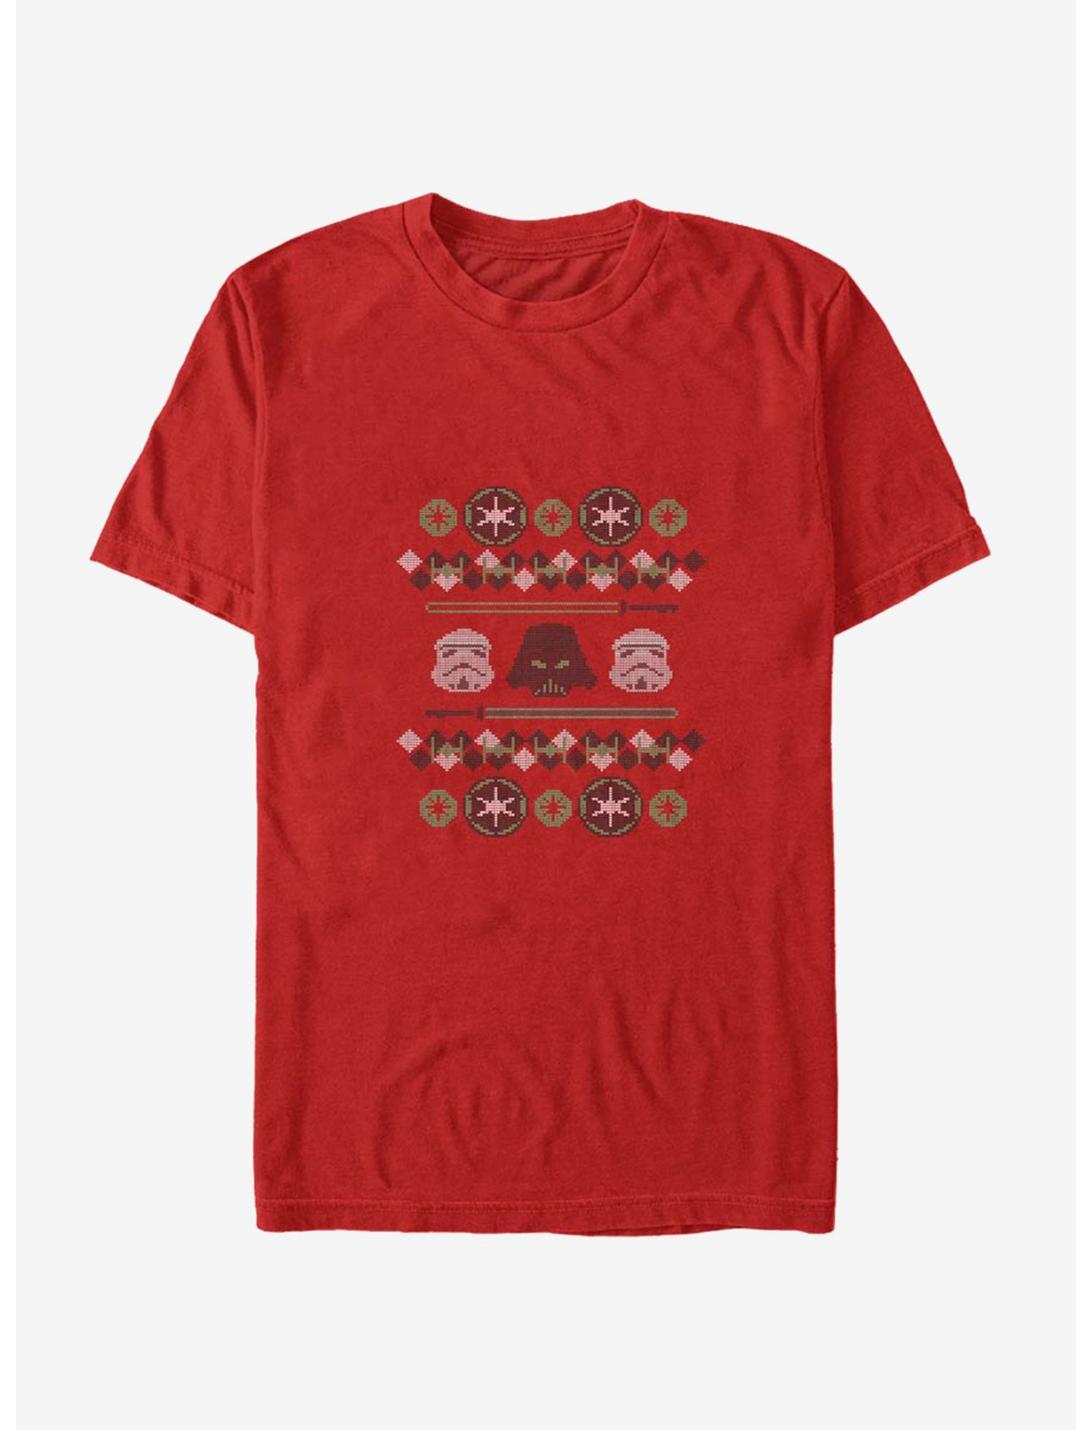 Star Wars Empire Christmas Pattern T-Shirt, RED HTR, hi-res